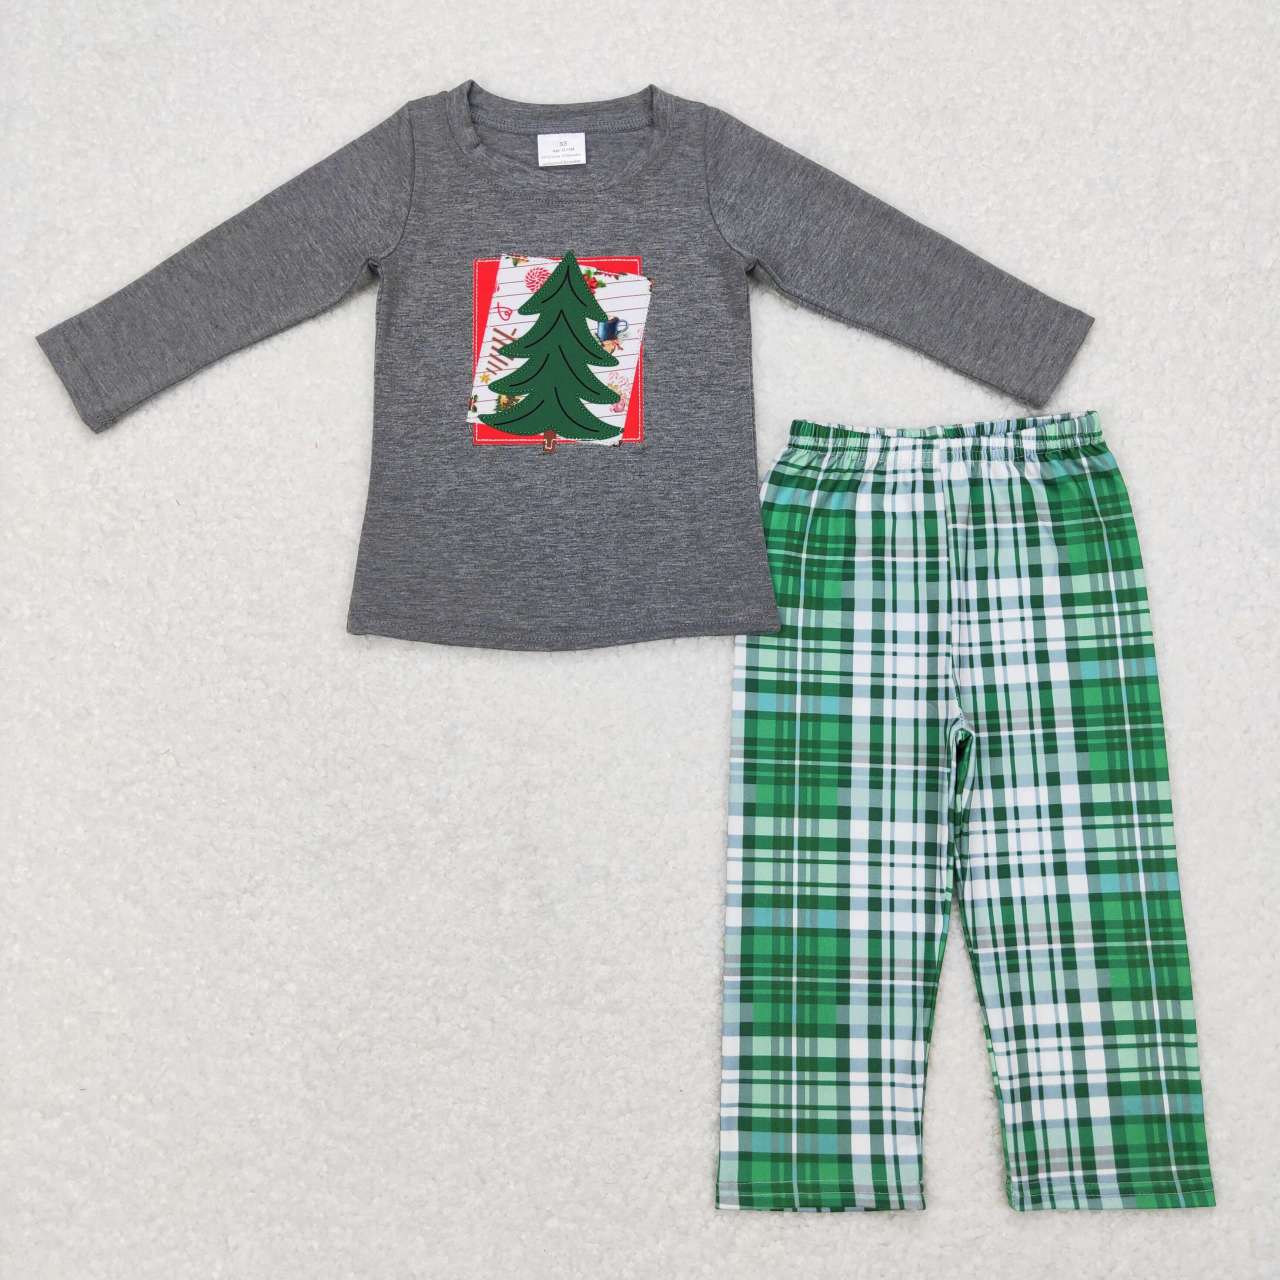 BLP0351 Embroidered Christmas tree gray long-sleeved green plaid trousers suit